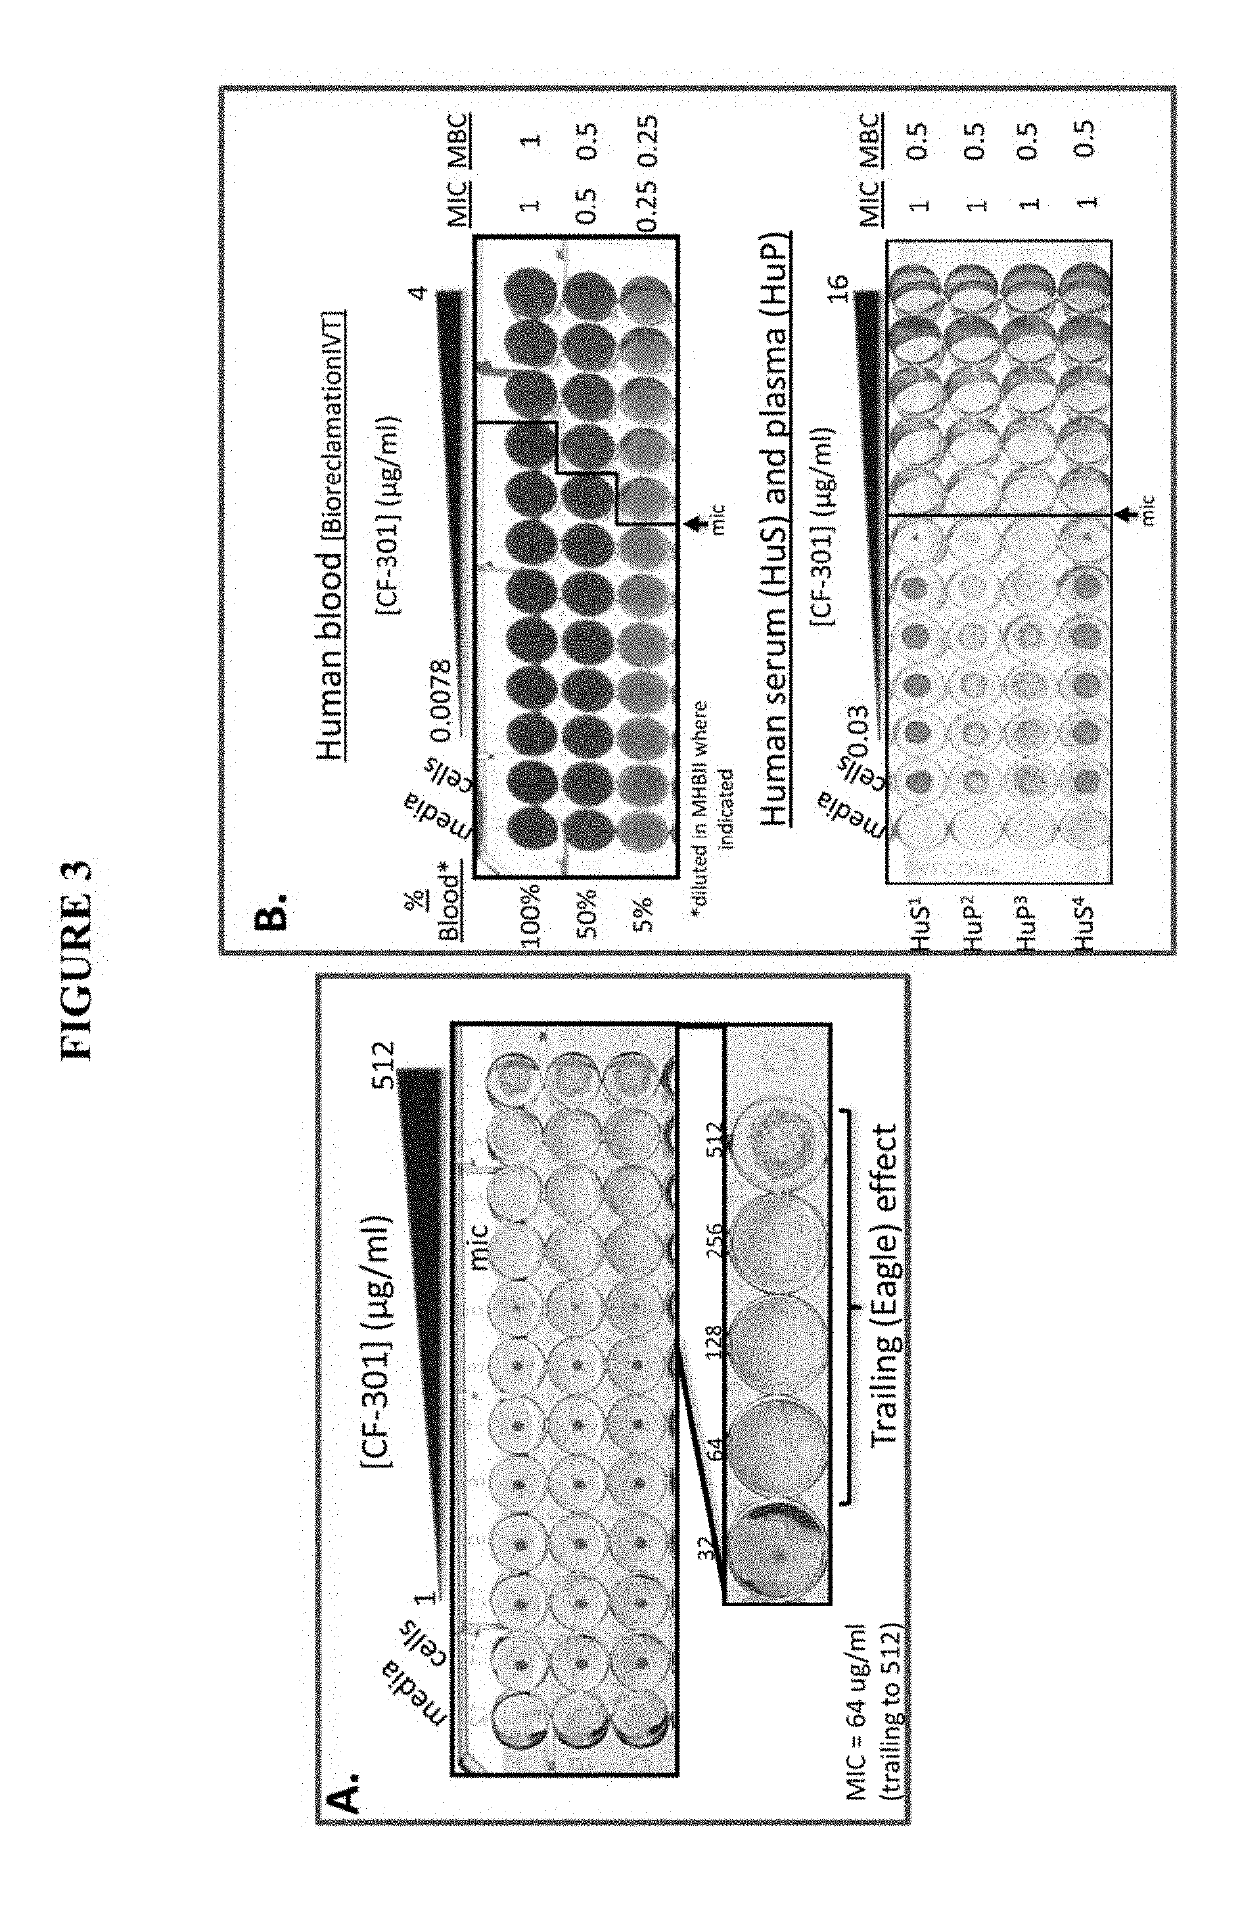 Broth microdilution method for evaluating and determining minimal inhibitory concentration of antibacterial polypeptides